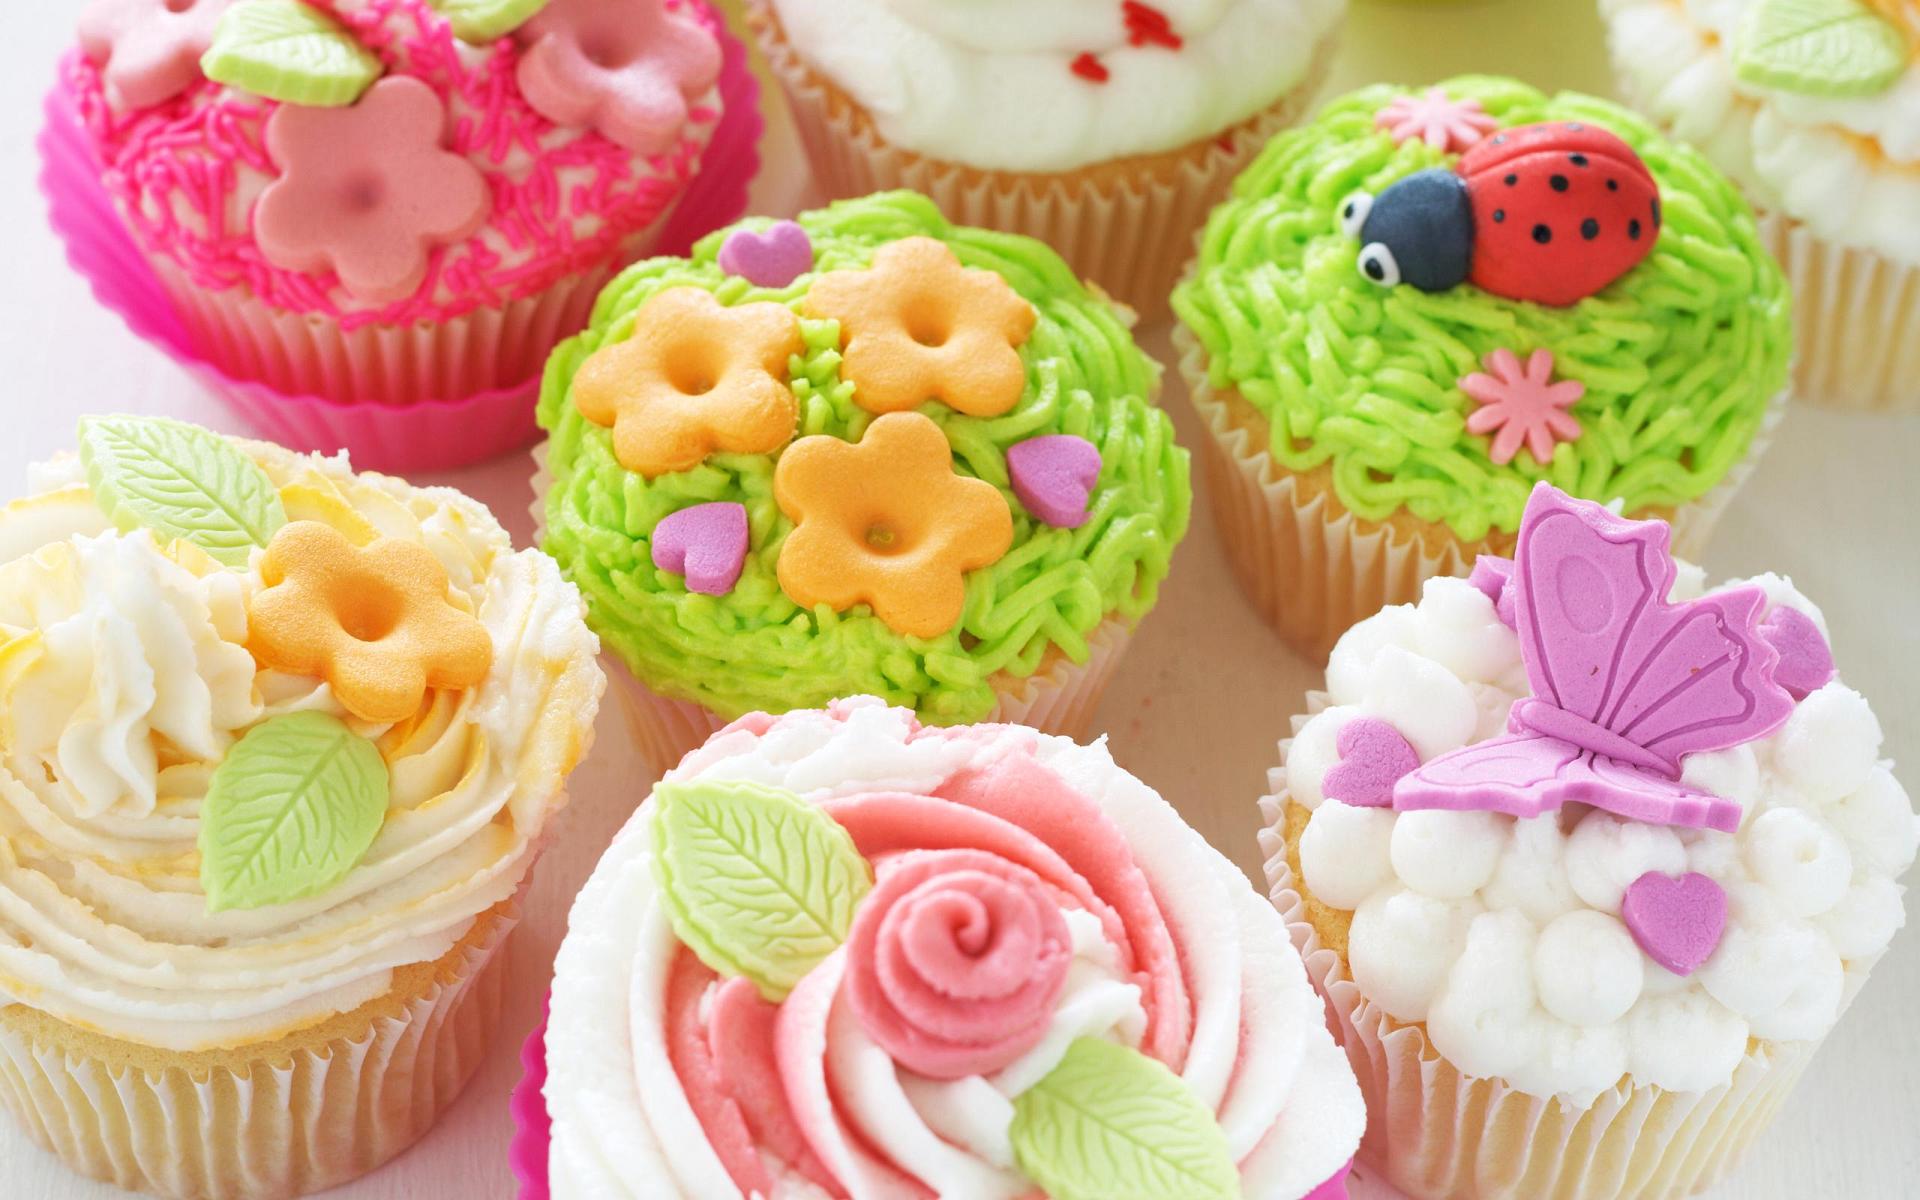 Wallpaper Cupcakes - 1920 x 1200 - Food Drinks Cocktails Cake Meat ...